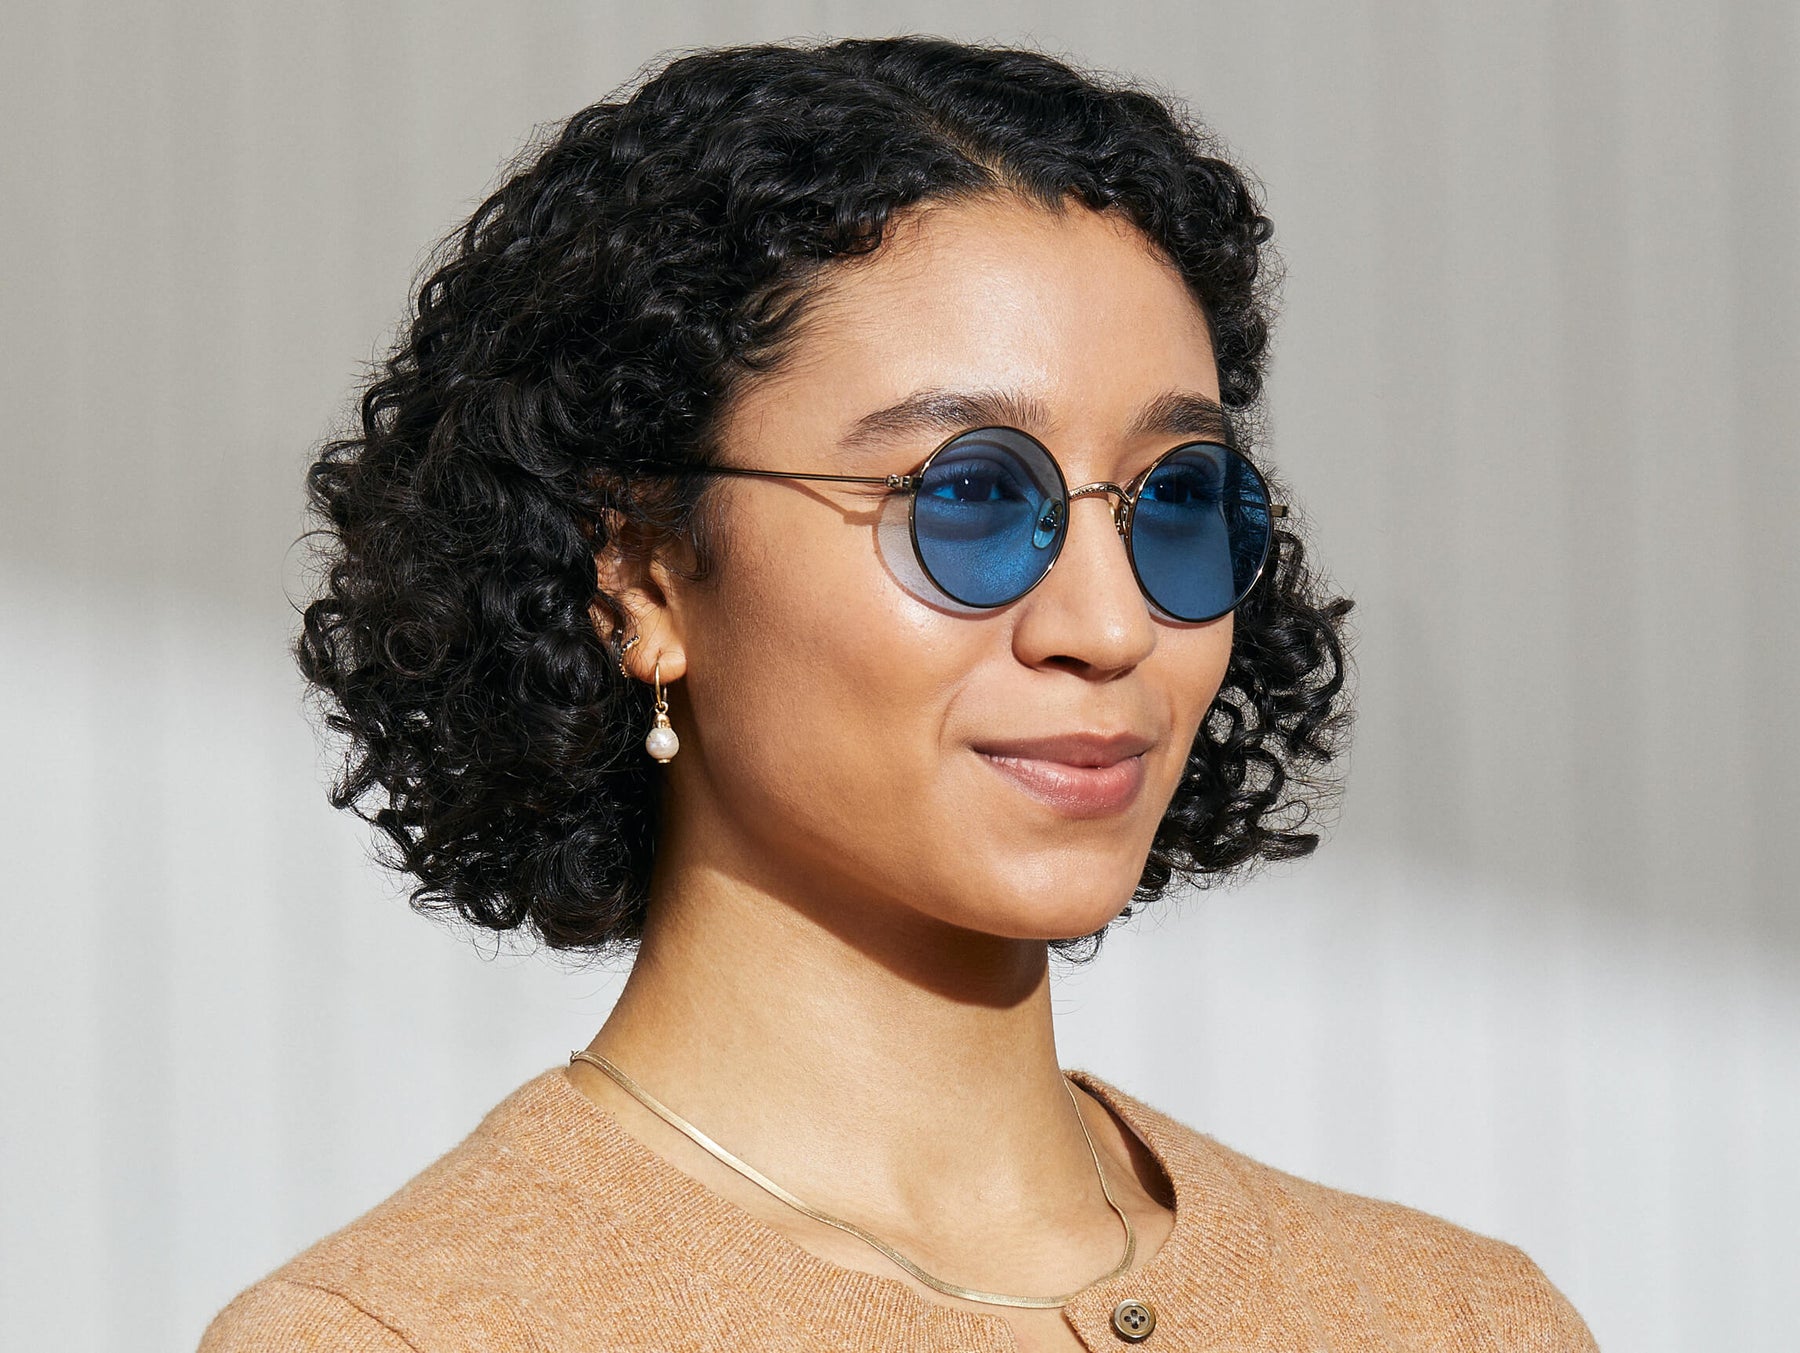 Model is wearing The HAMISH in Antique Gold in size 47 with Celebrity Blue Tinted Lenses